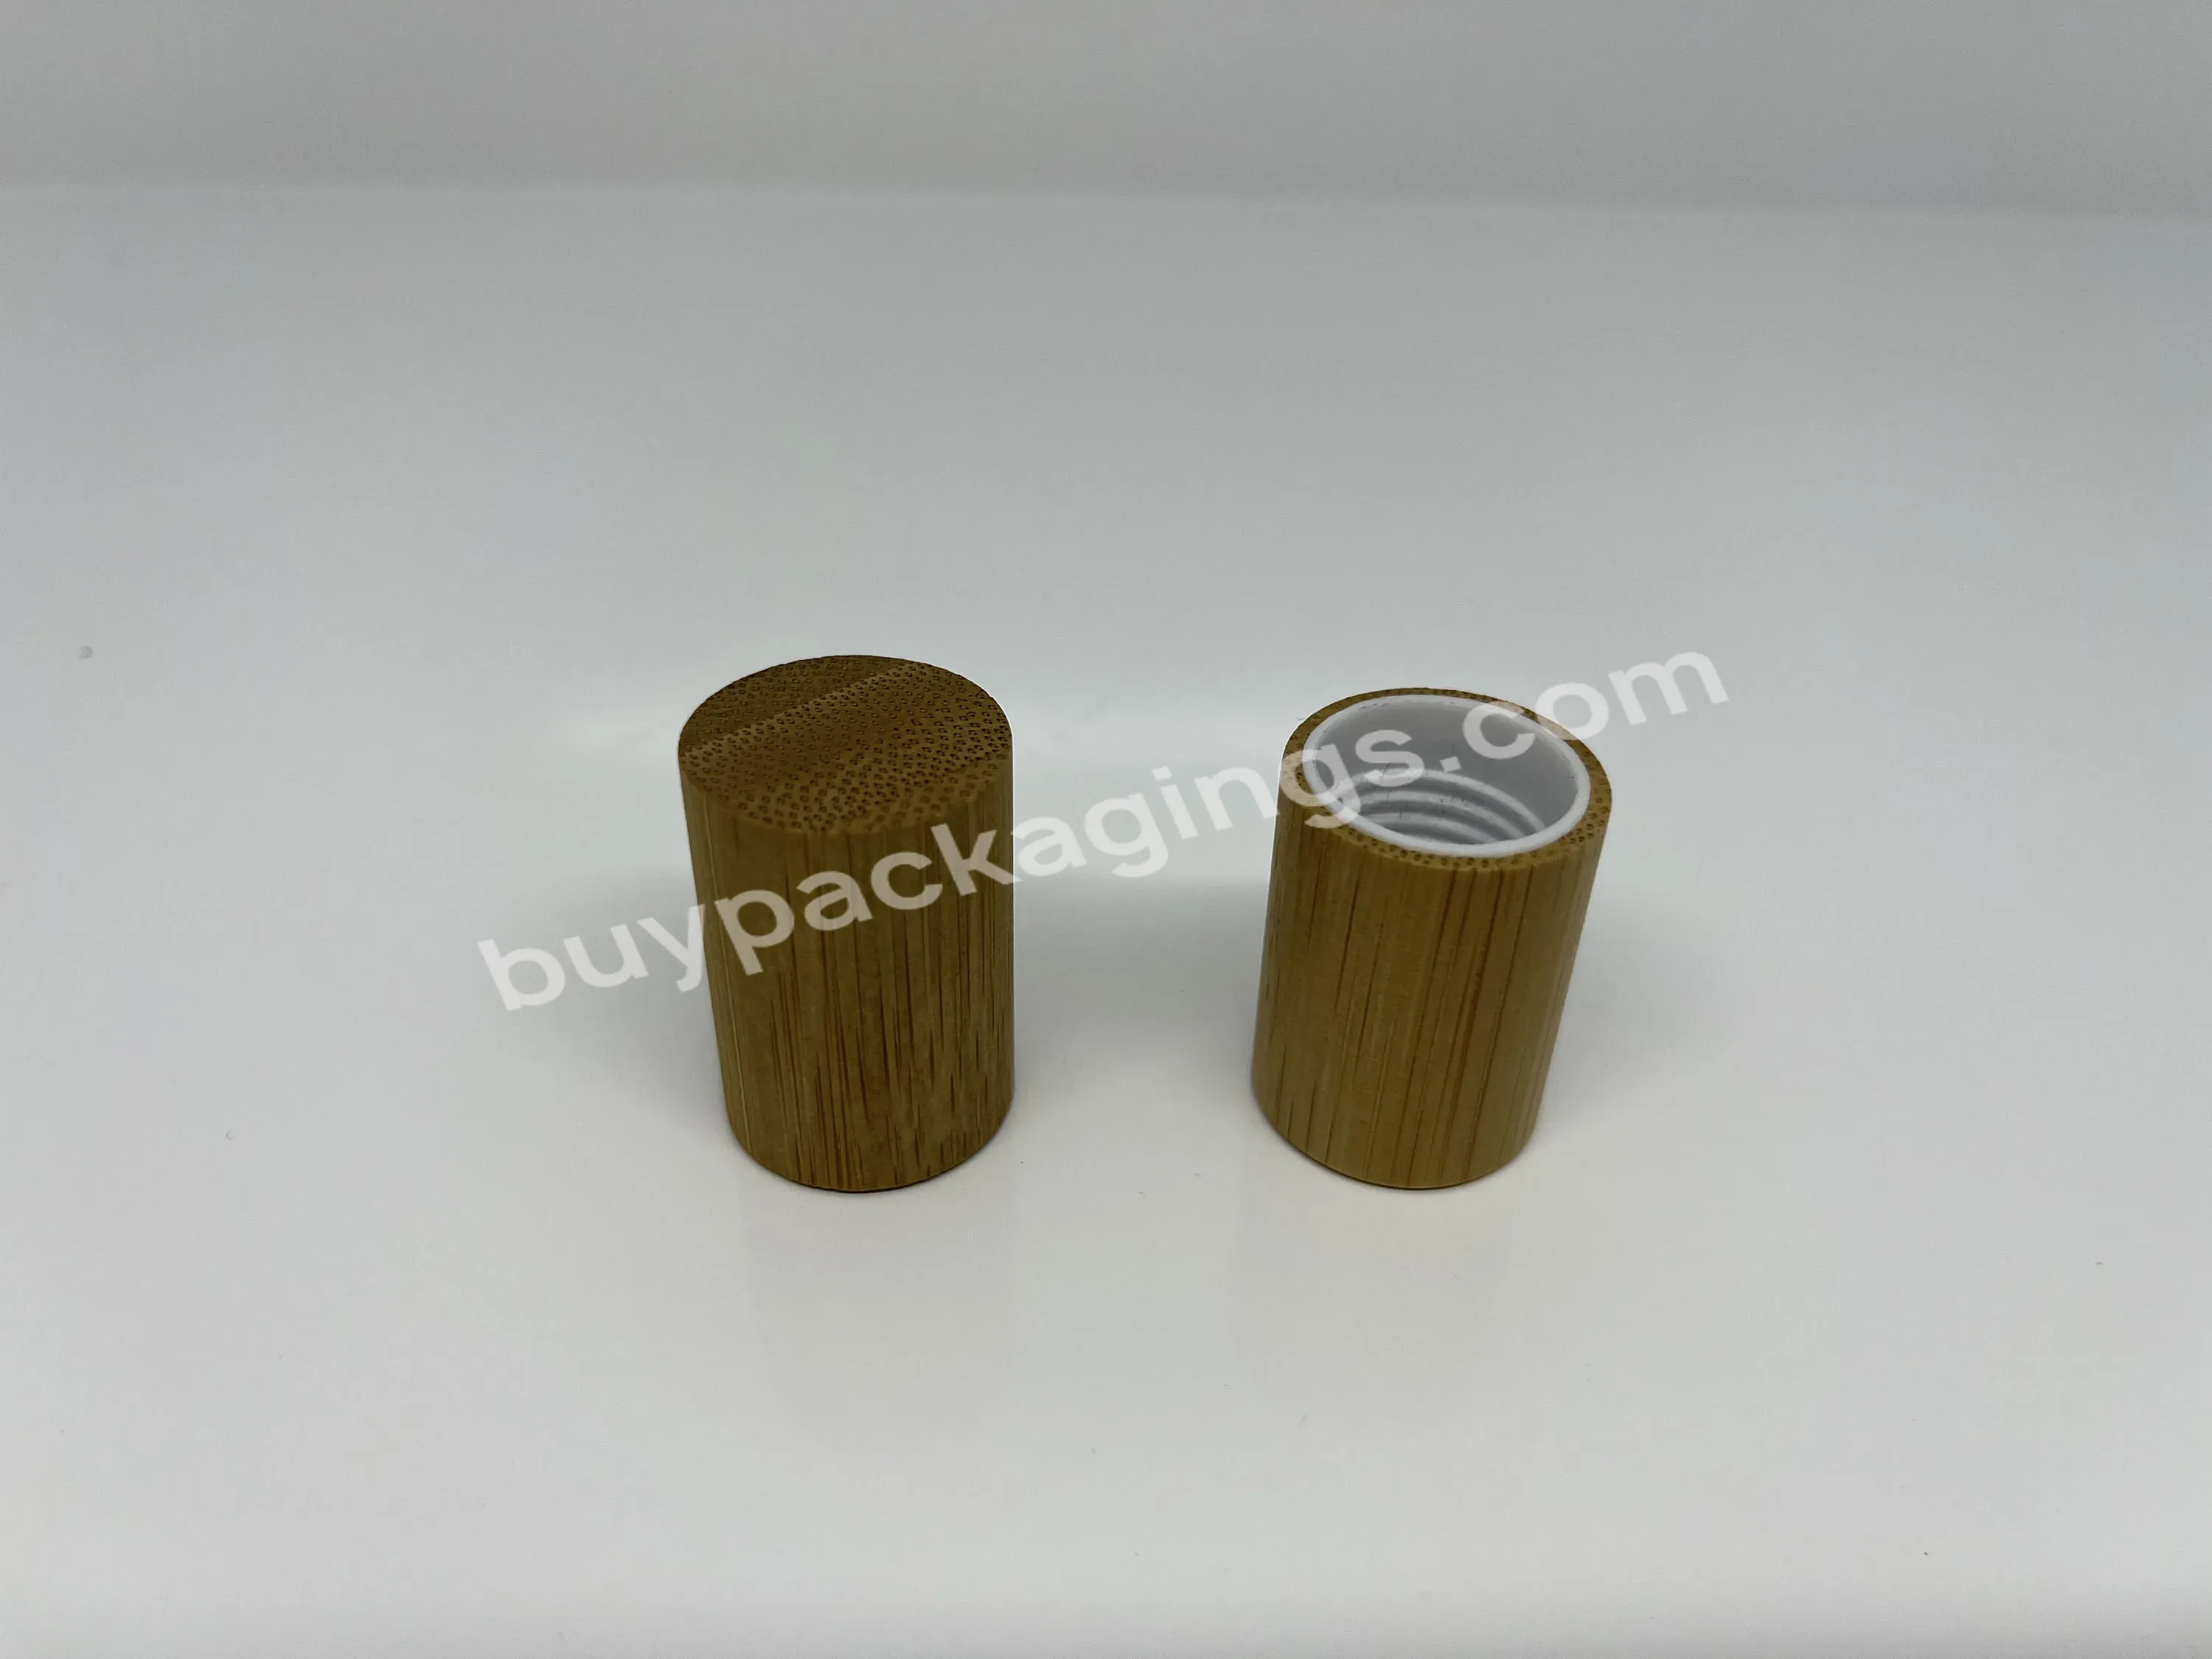 16mm Wholesale High Quality Bamboo Cap Essential Oil Bottle Cap Roll On Bottle Cap - Buy 16mm Wholesale High Quality Bamboo Cap,Essential Oil Bottle Cap,Roll On Bottle Cap.